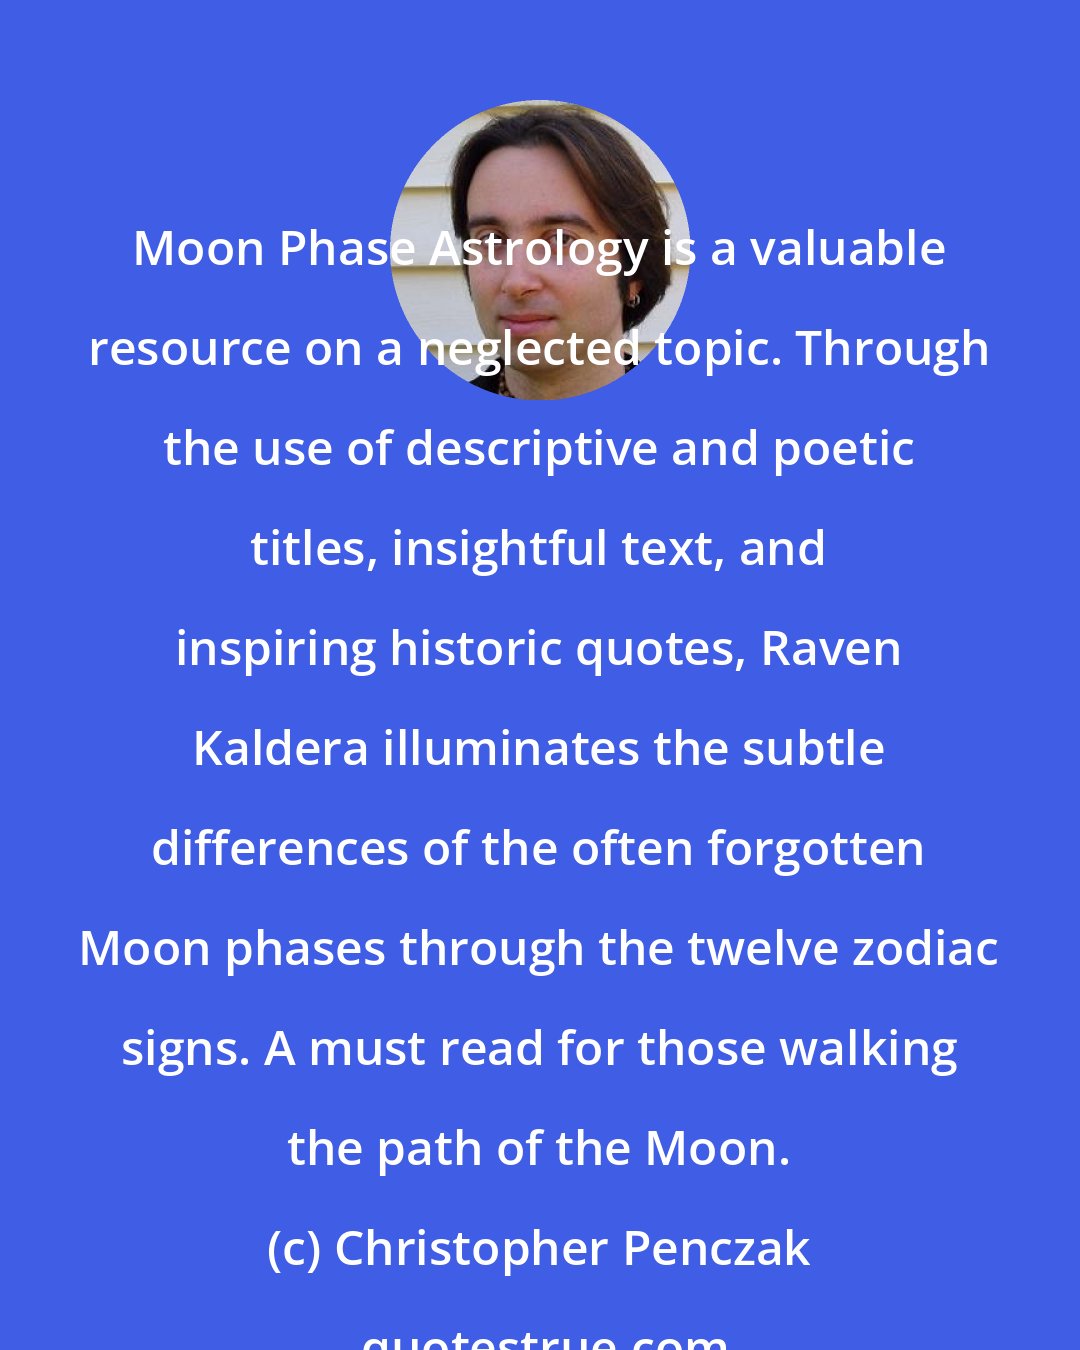 Christopher Penczak: Moon Phase Astrology is a valuable resource on a neglected topic. Through the use of descriptive and poetic titles, insightful text, and inspiring historic quotes, Raven Kaldera illuminates the subtle differences of the often forgotten Moon phases through the twelve zodiac signs. A must read for those walking the path of the Moon.